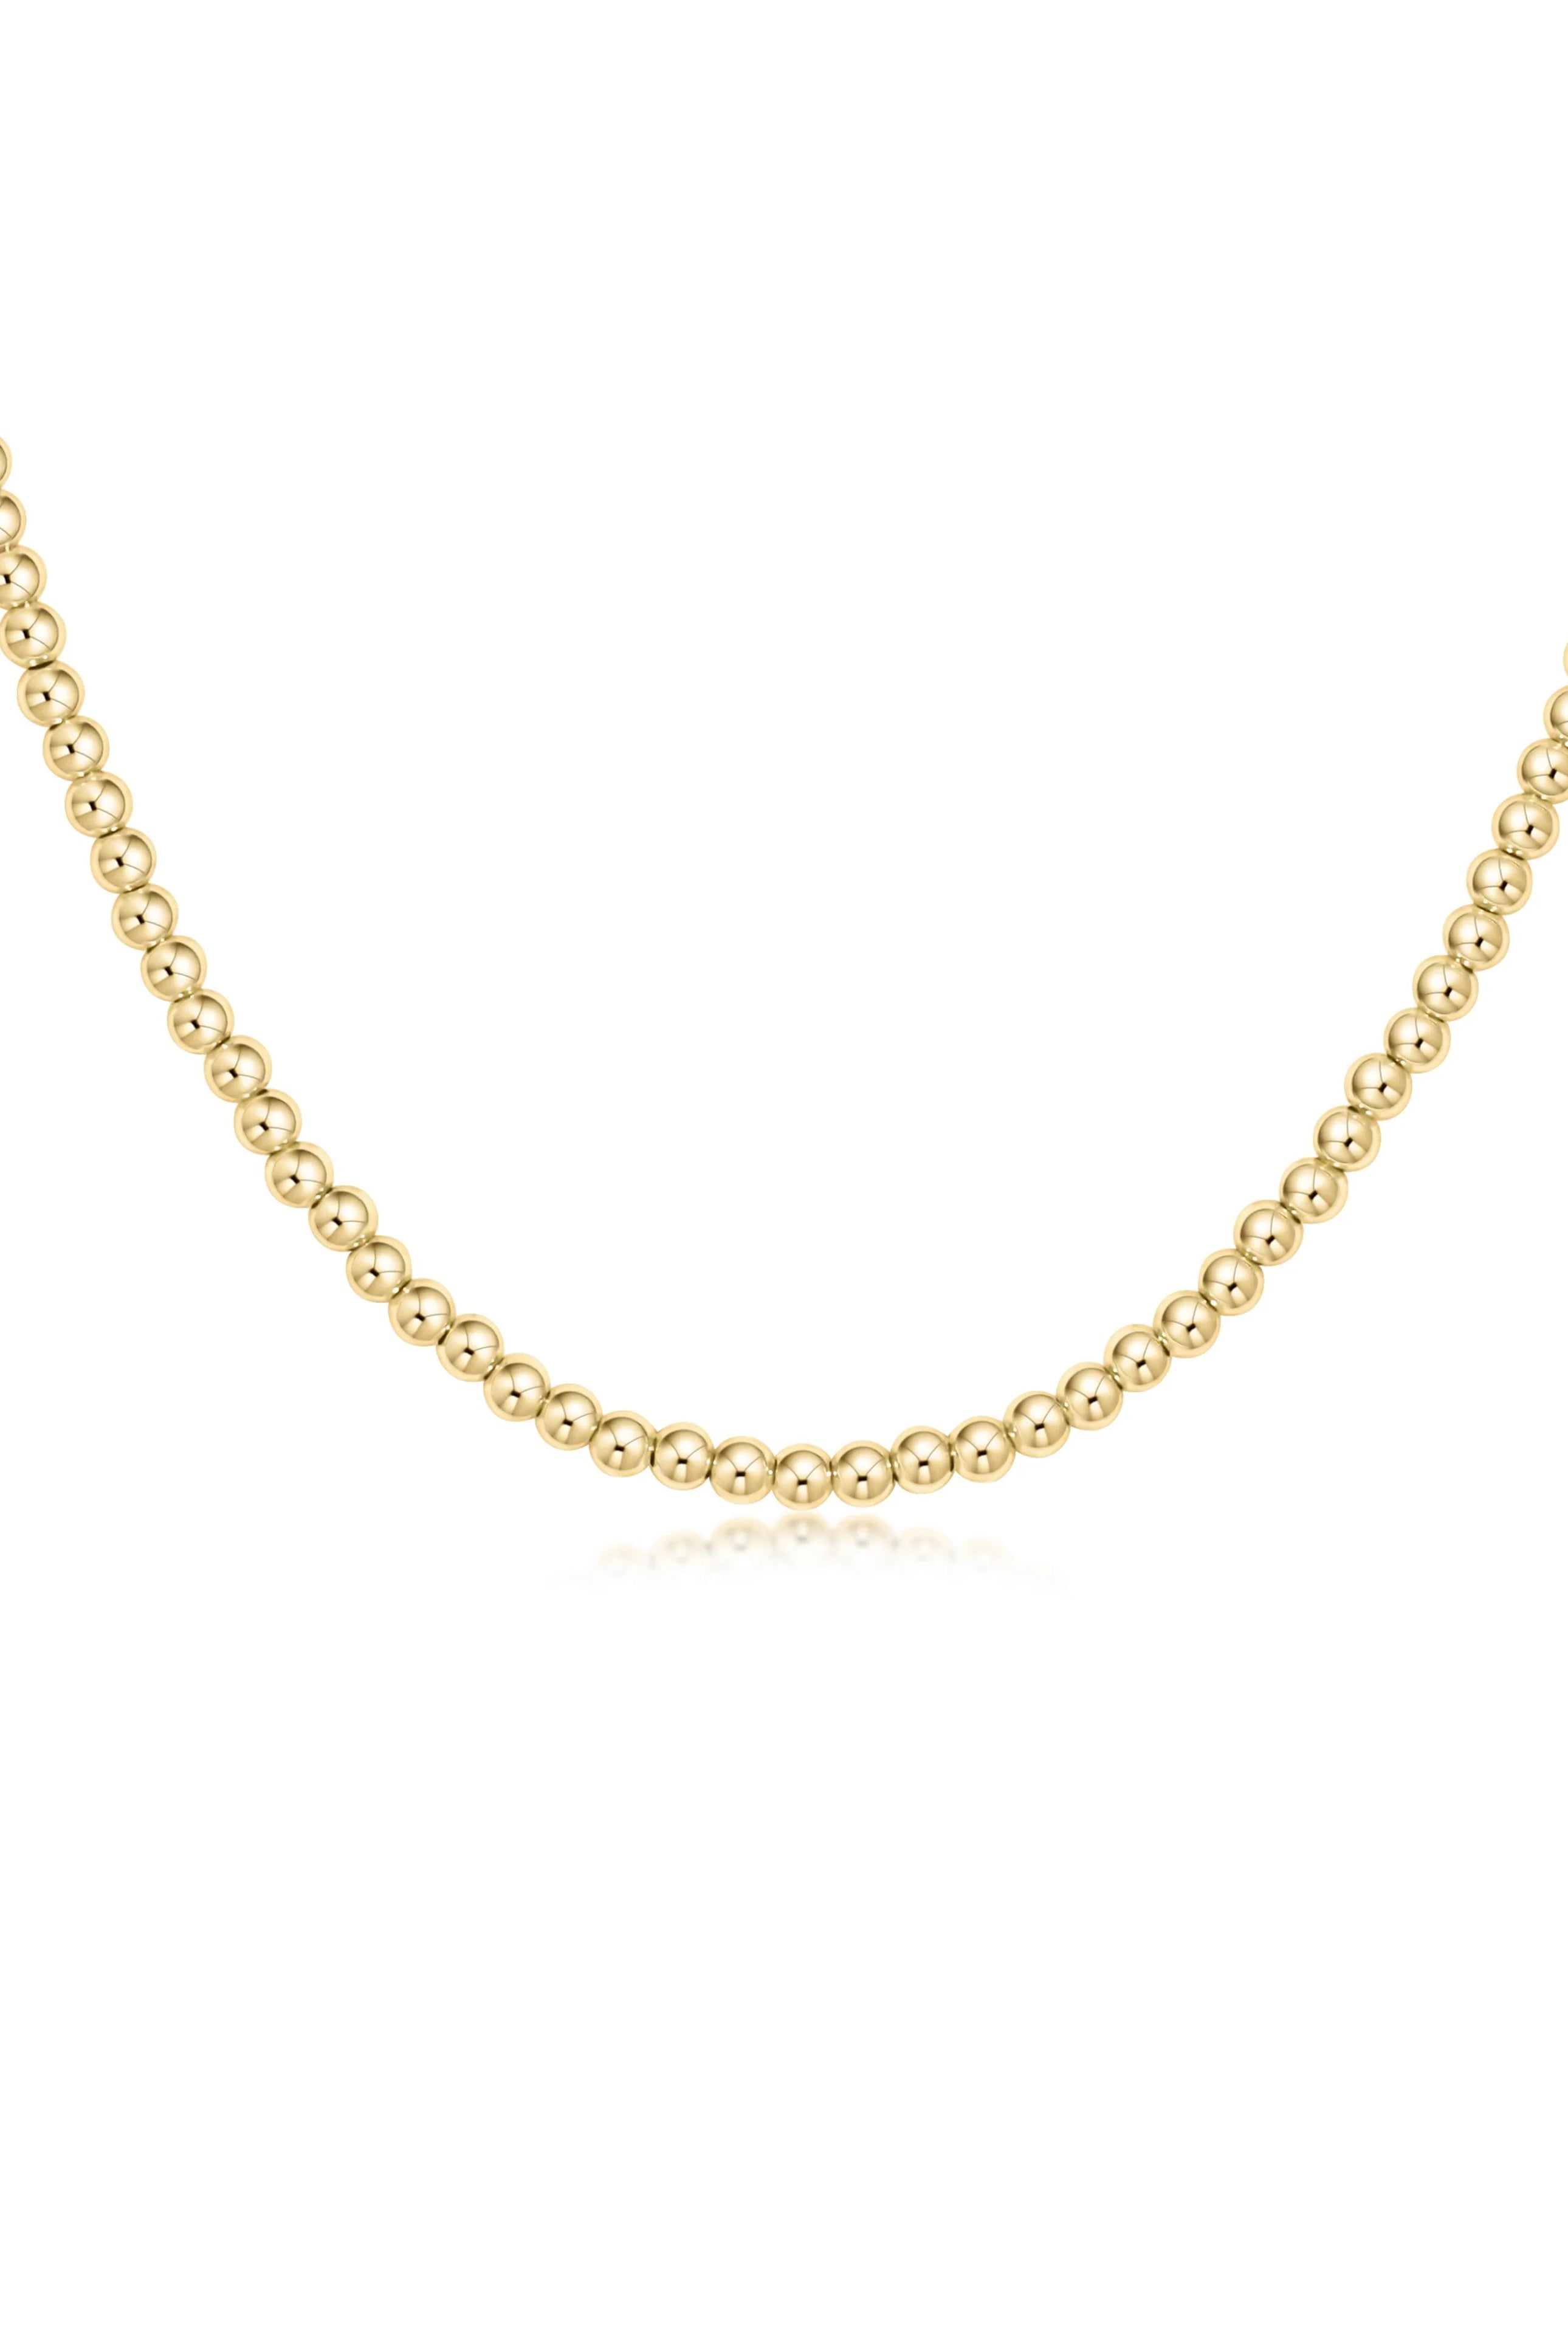 Classic Gold 3mm Necklace-Necklaces-eNewton-The Lovely Closet, Women's Fashion Boutique in Alexandria, KY